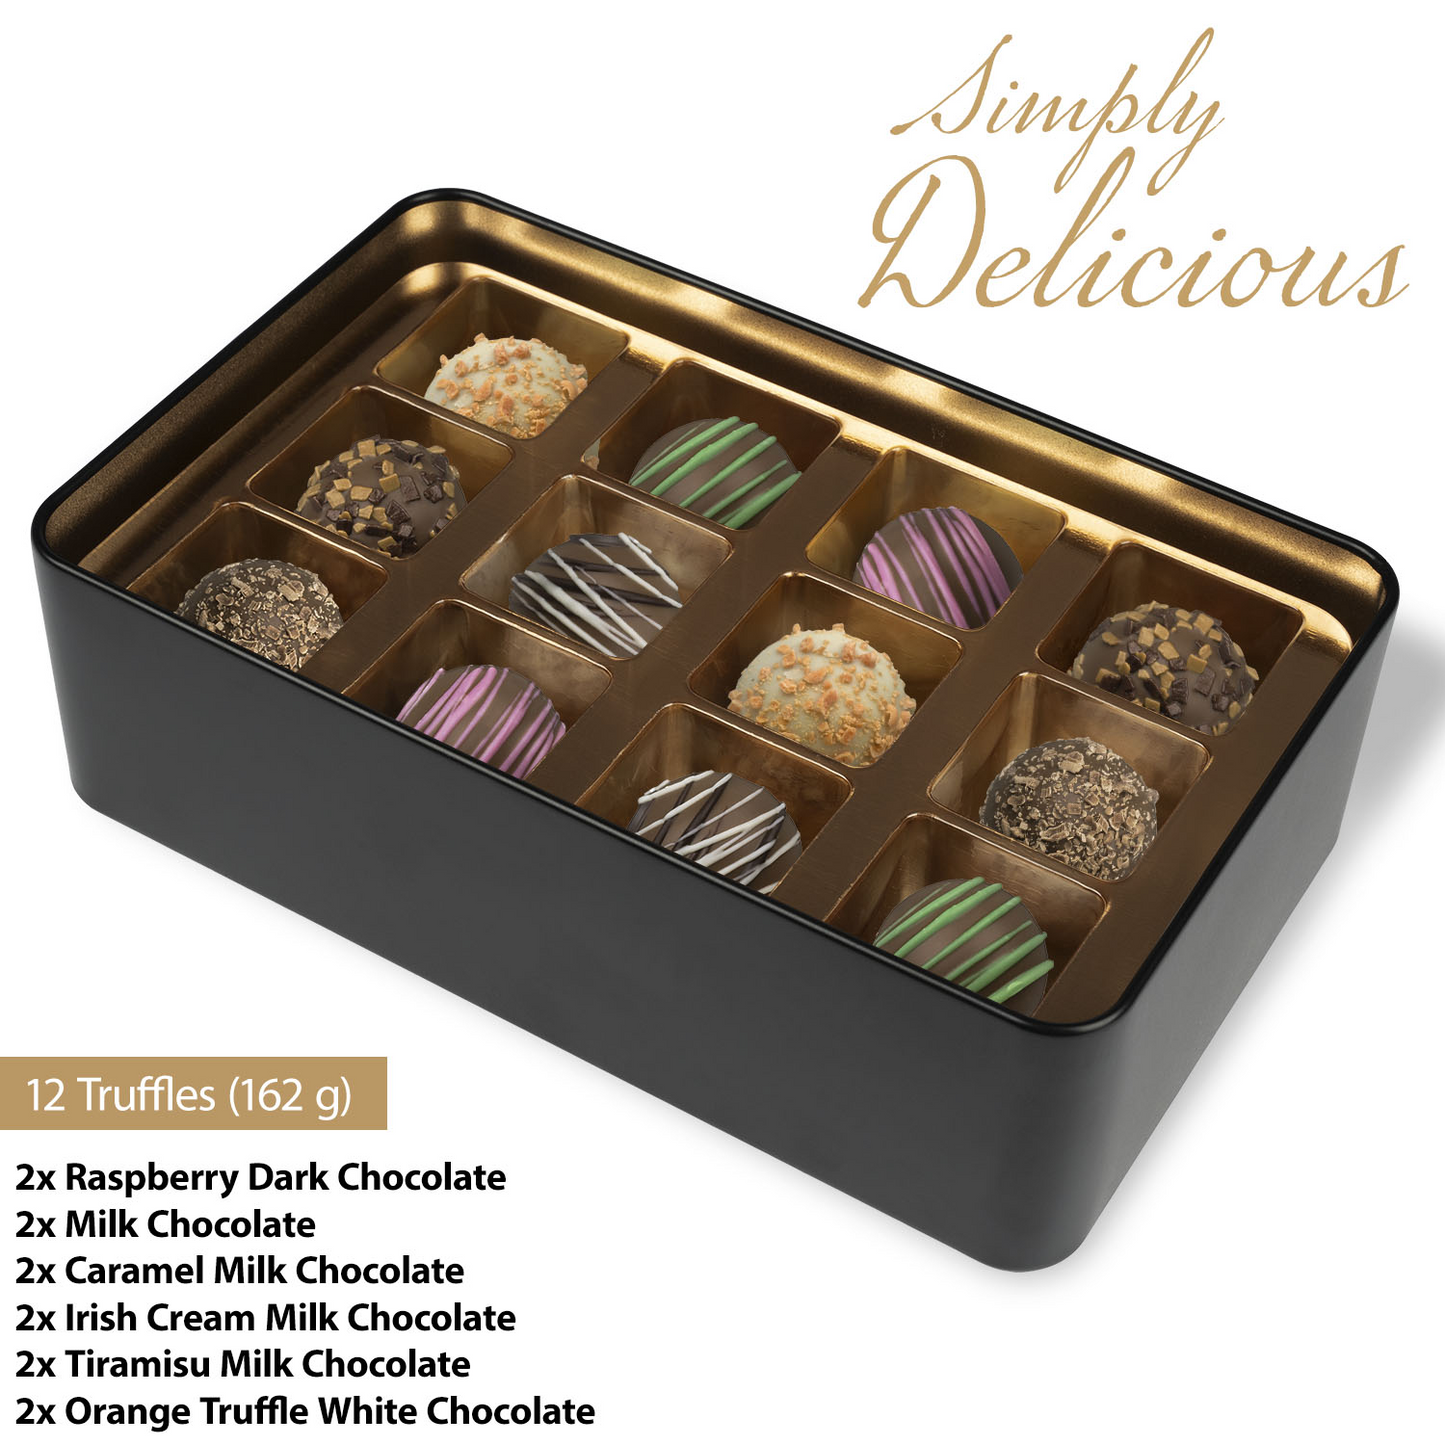 Handmade Chocolate Truffles in "Meant to Be Here" Tin